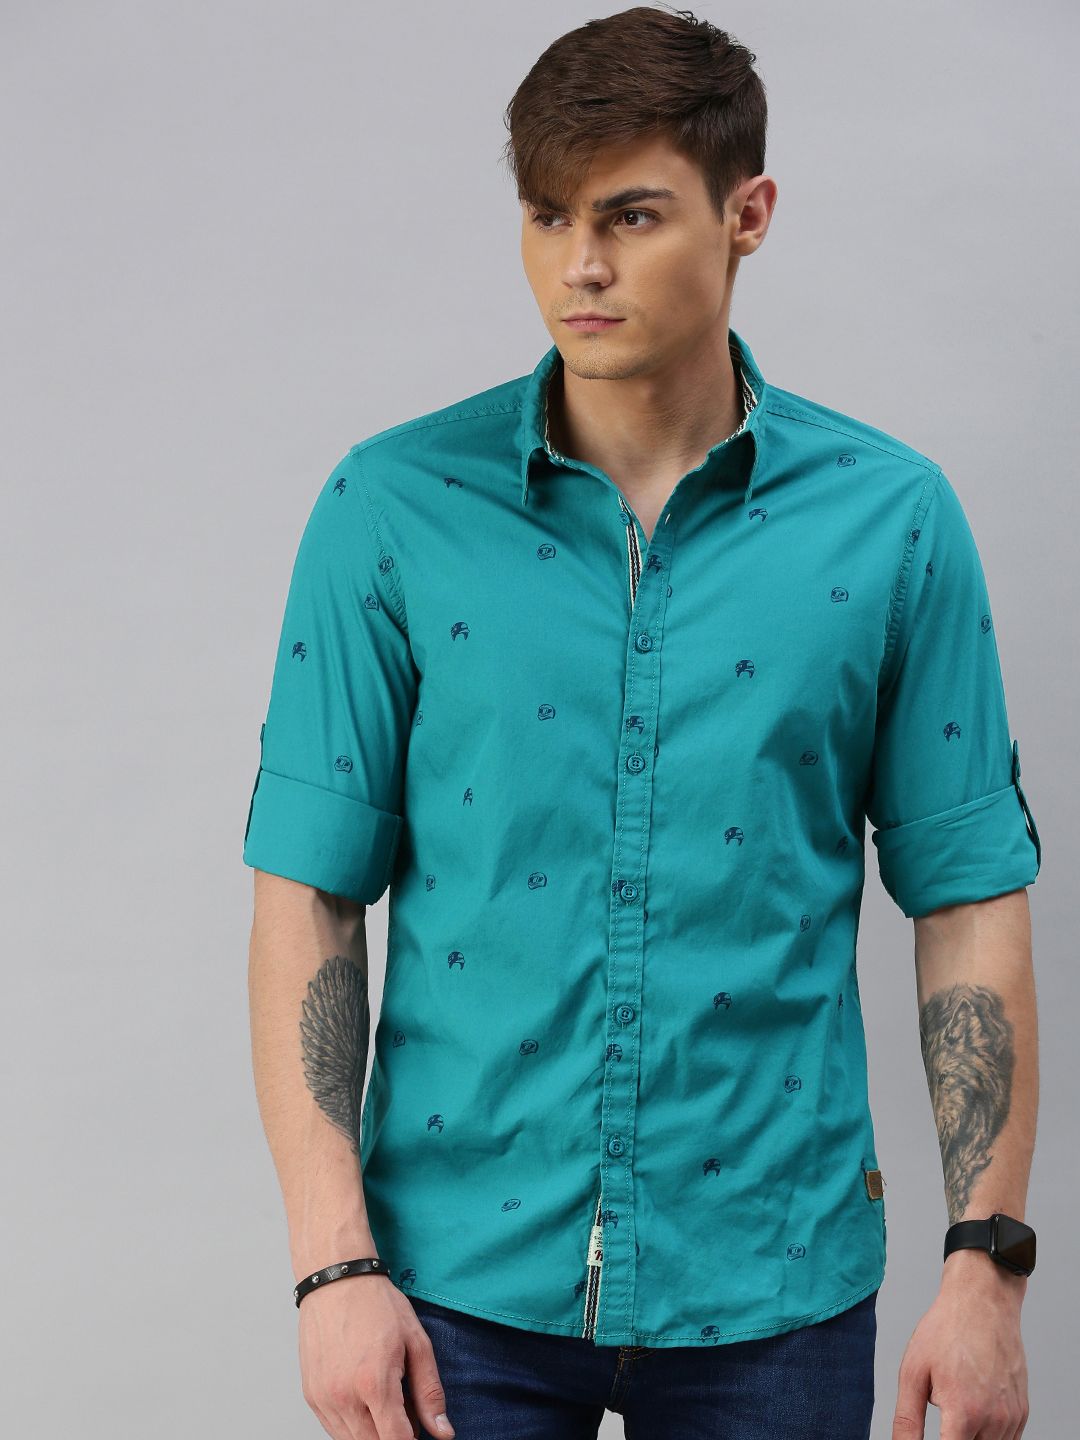 The Roadster Lifestyle Co Men Teal & Navy Blue Regular Fit Printed Casual Shirt